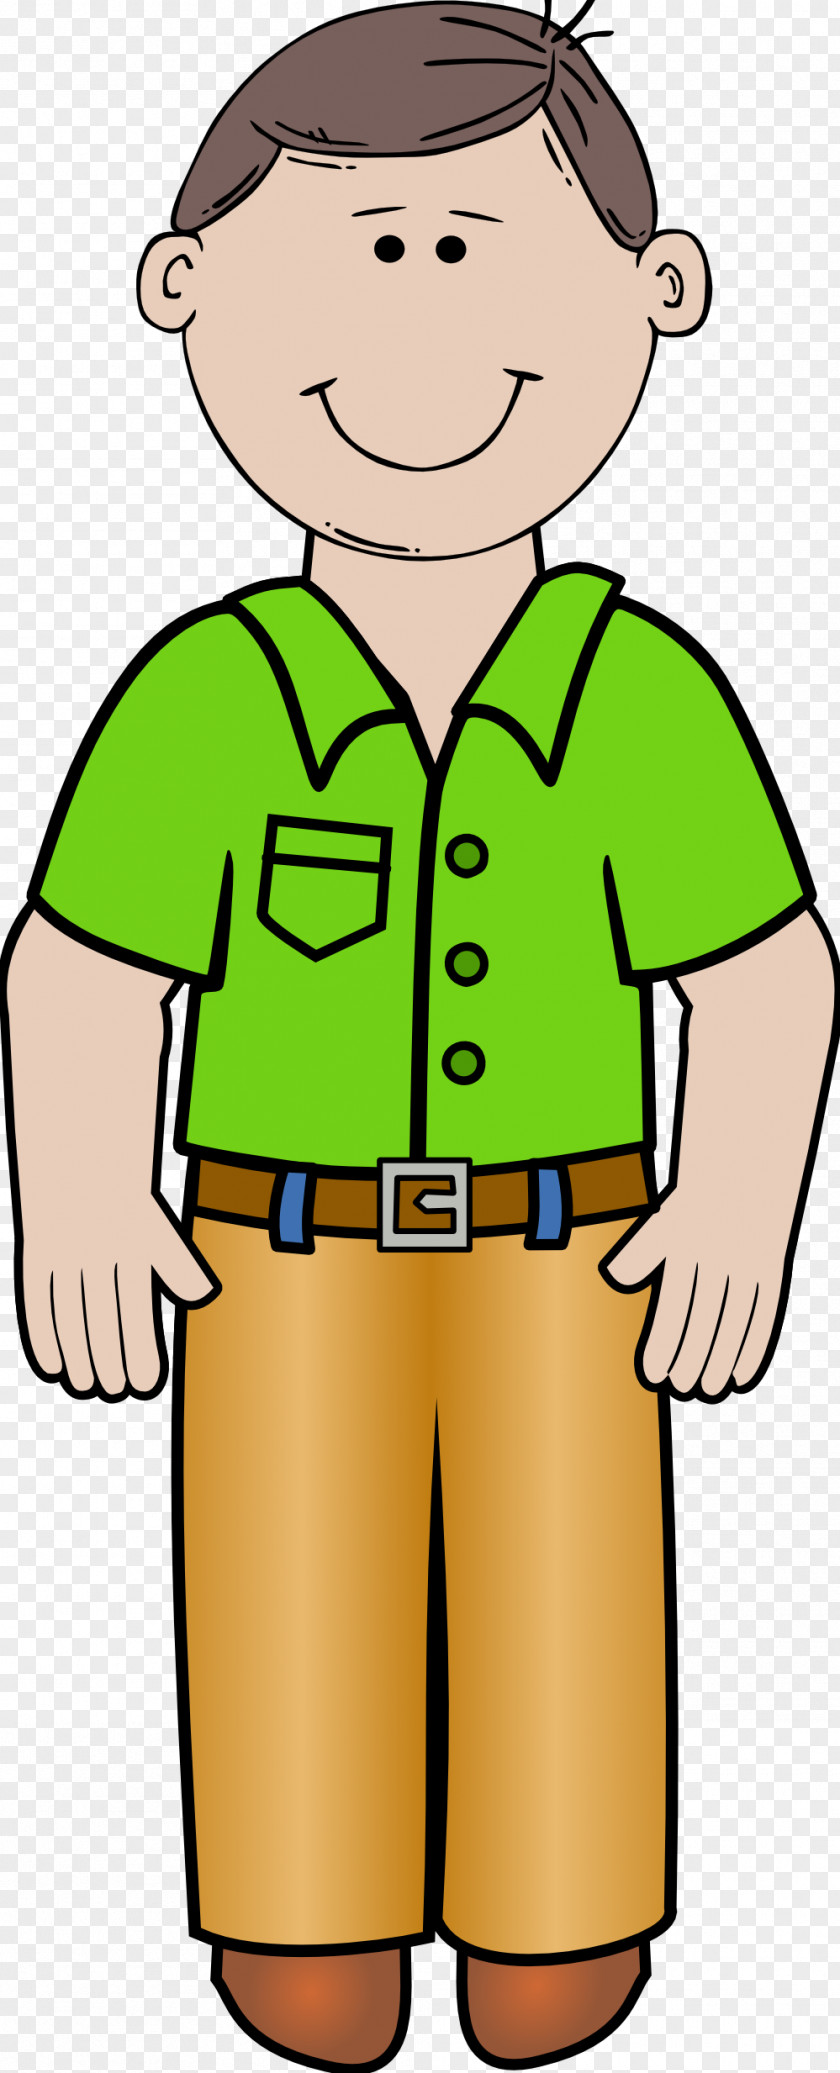 Overwhelmed Dad Cliparts Father Mother Cartoon Clip Art PNG